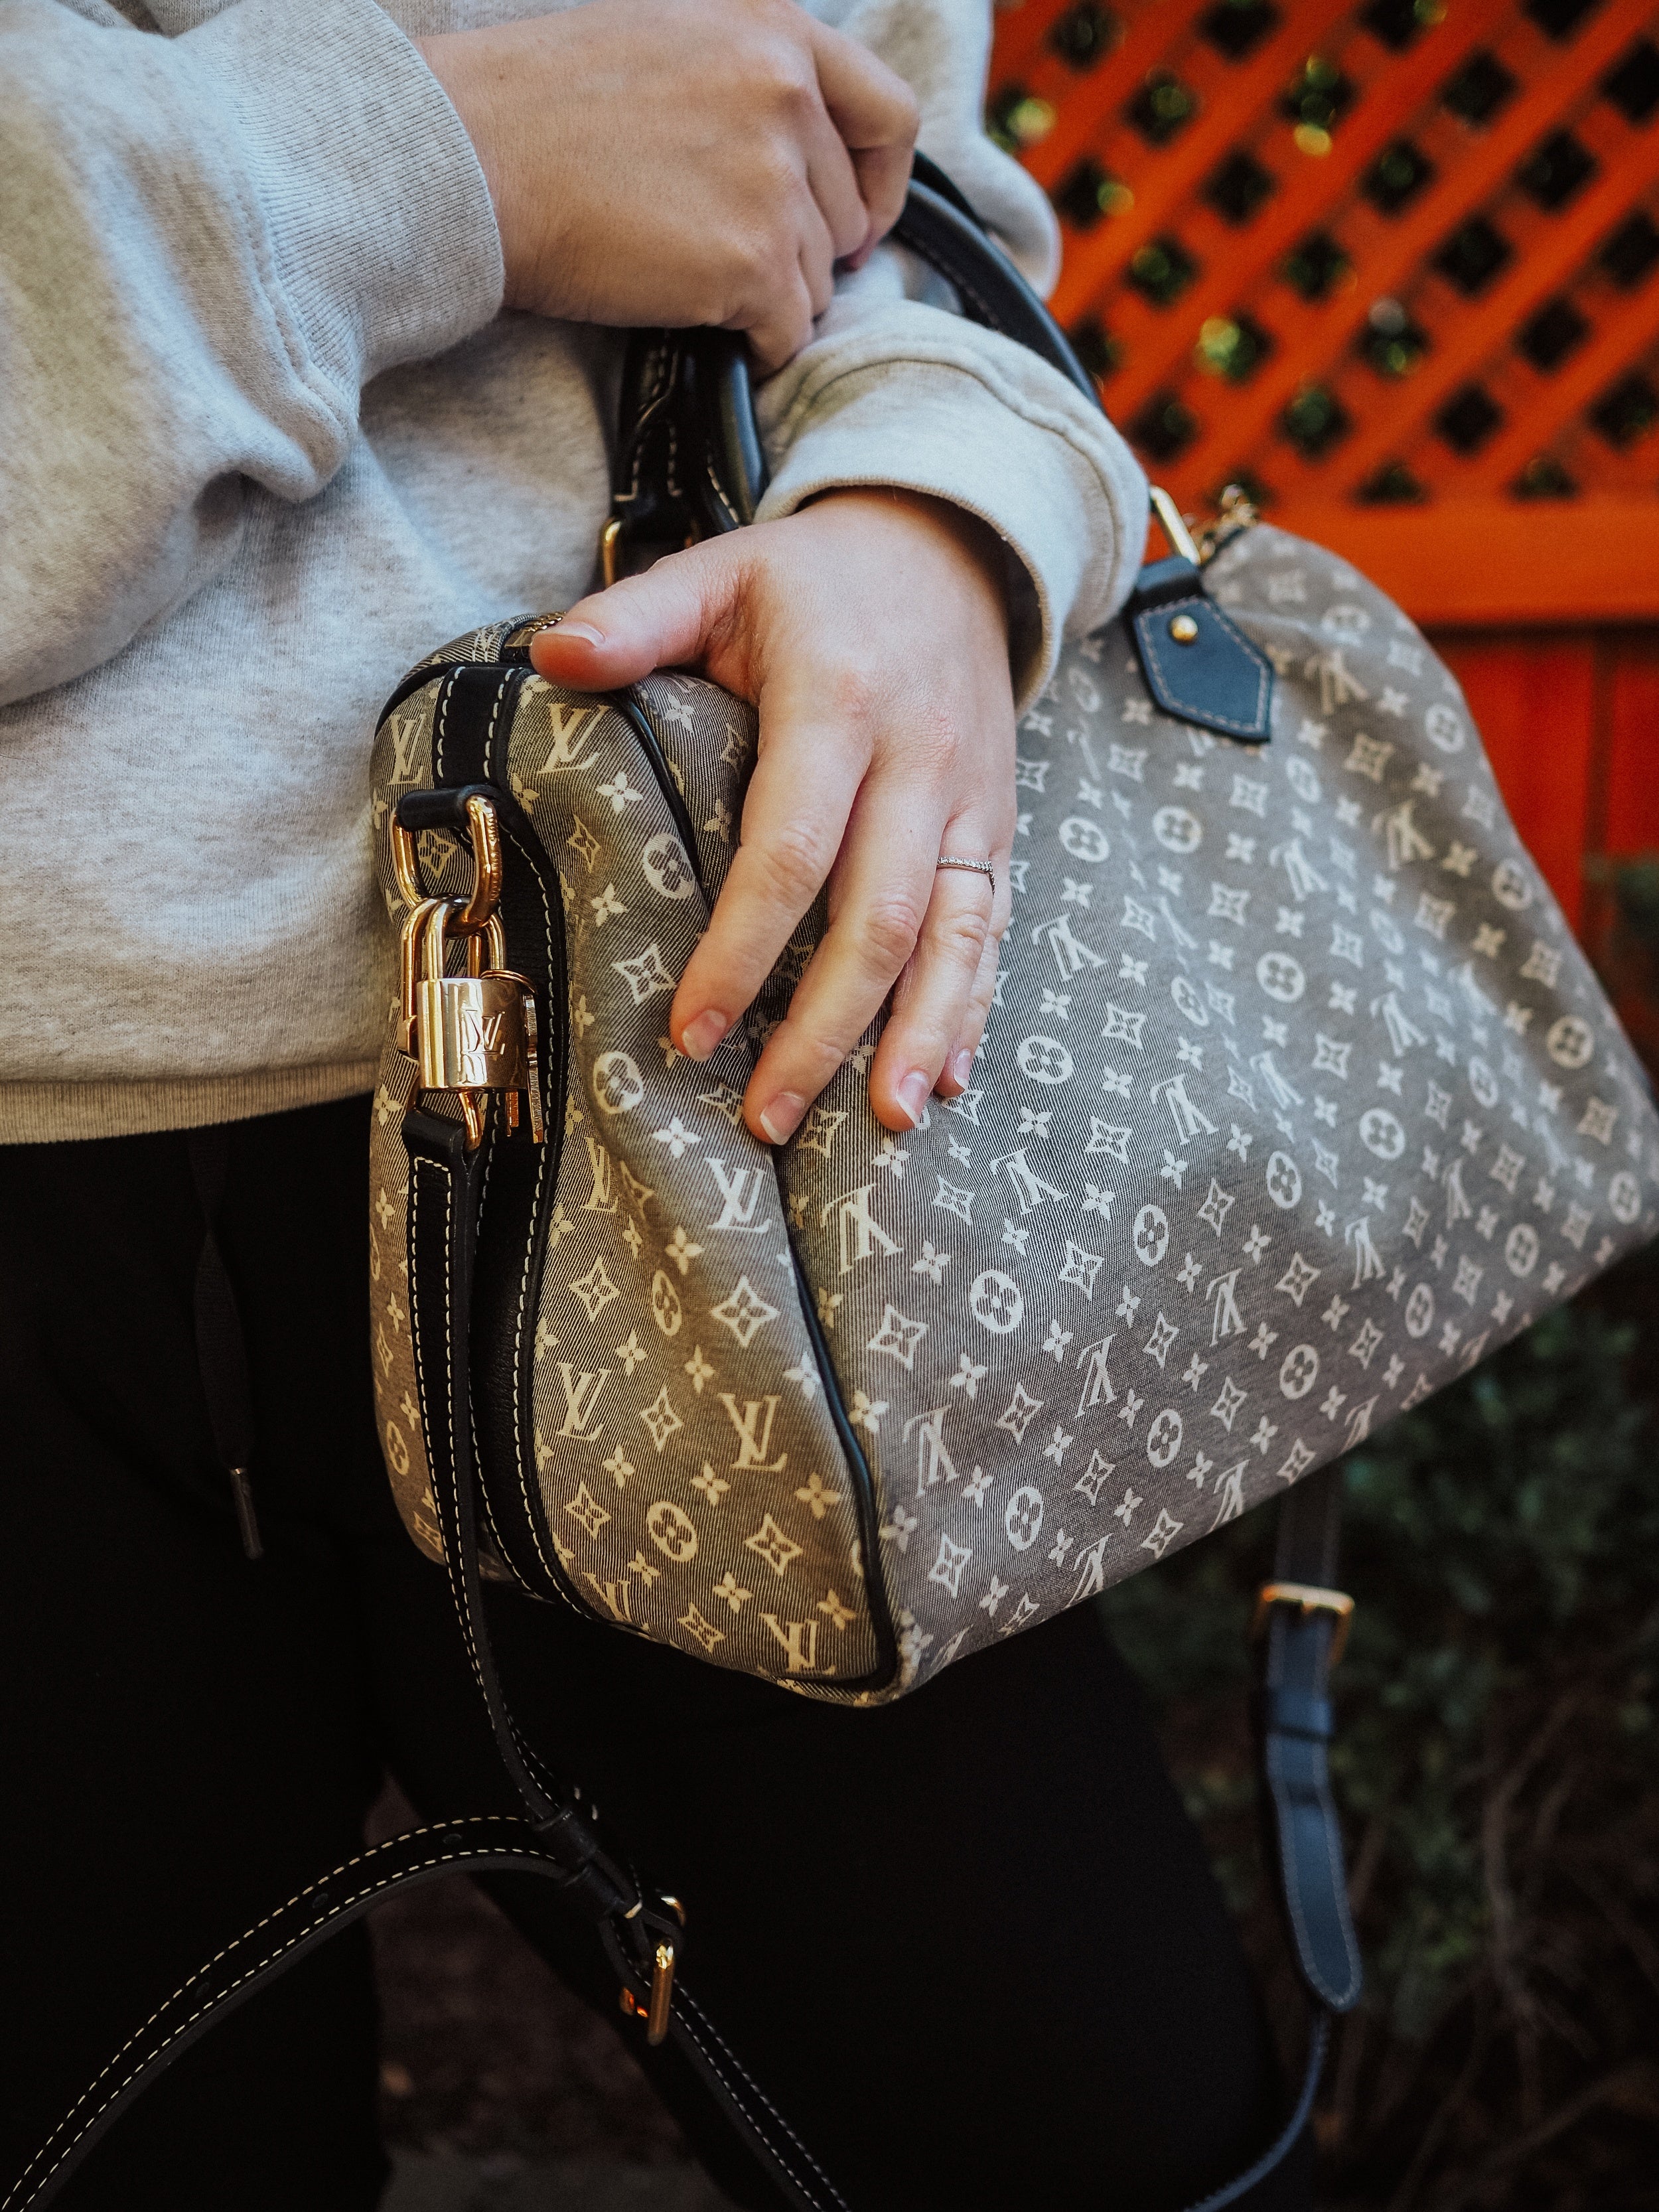 The 2022 CHEAPEST & Best Value for $$ Louis Vuitton Handbags for